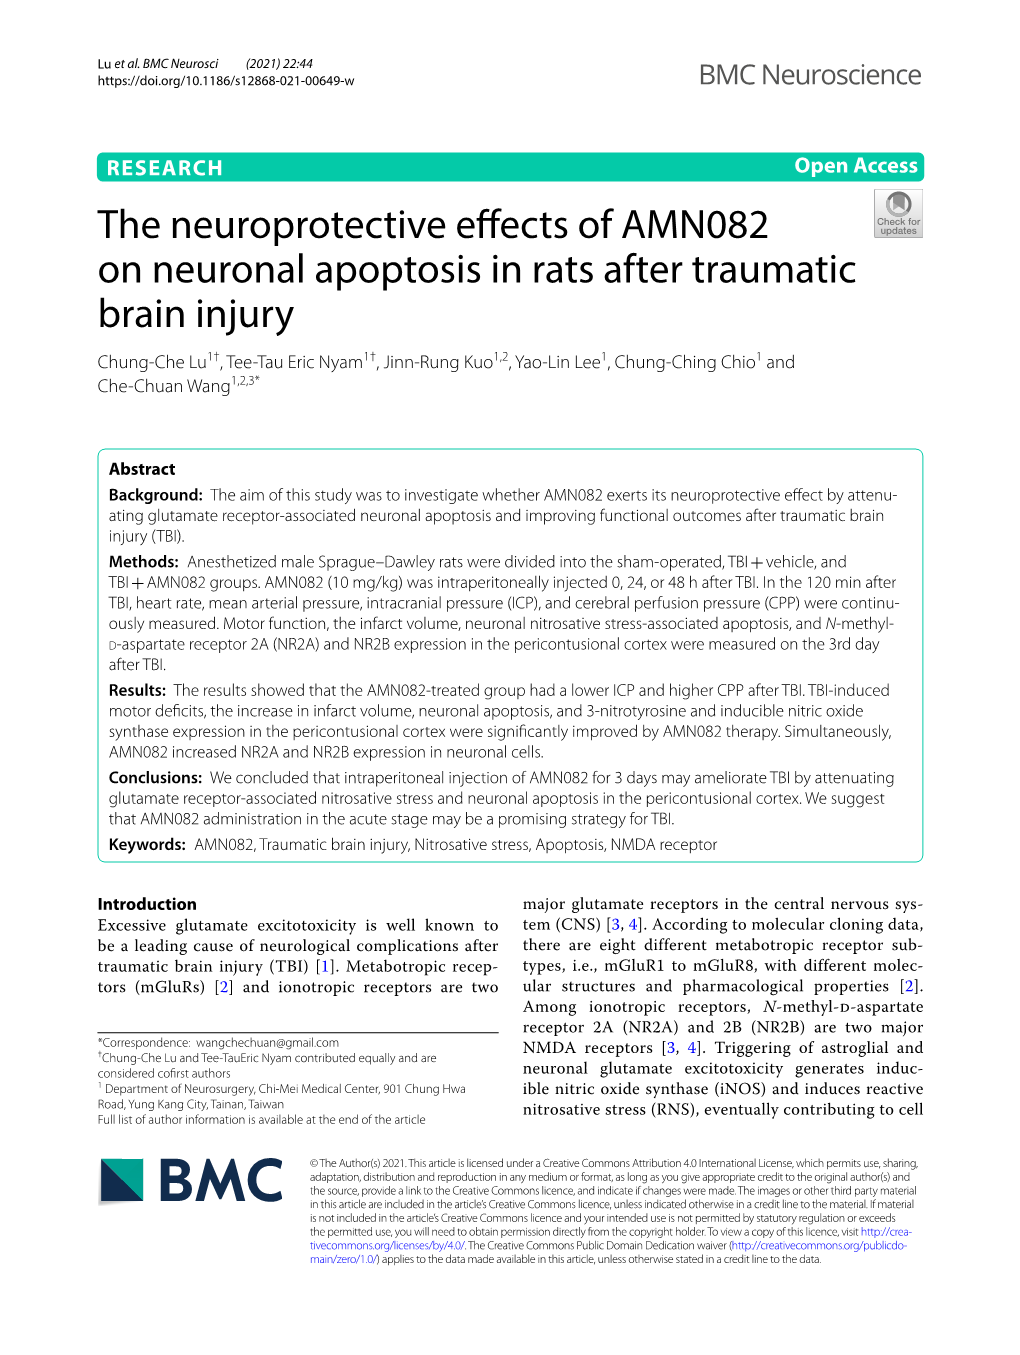 The Neuroprotective Effects of AMN082 On